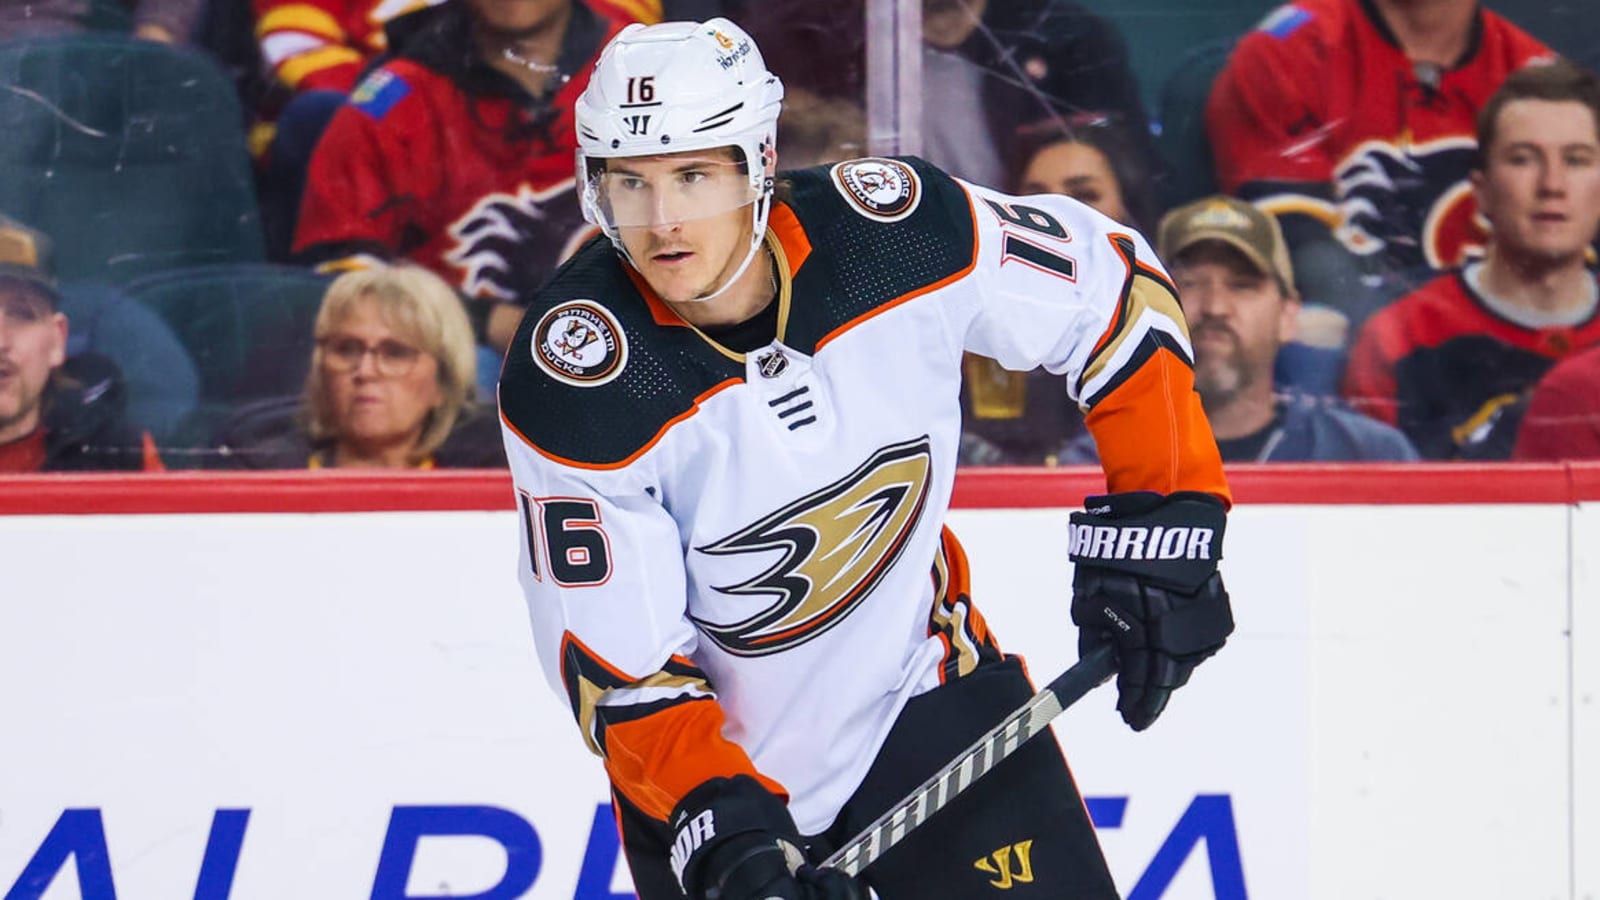 Ducks forward fined $5,000 for unsportsmanlike conduct